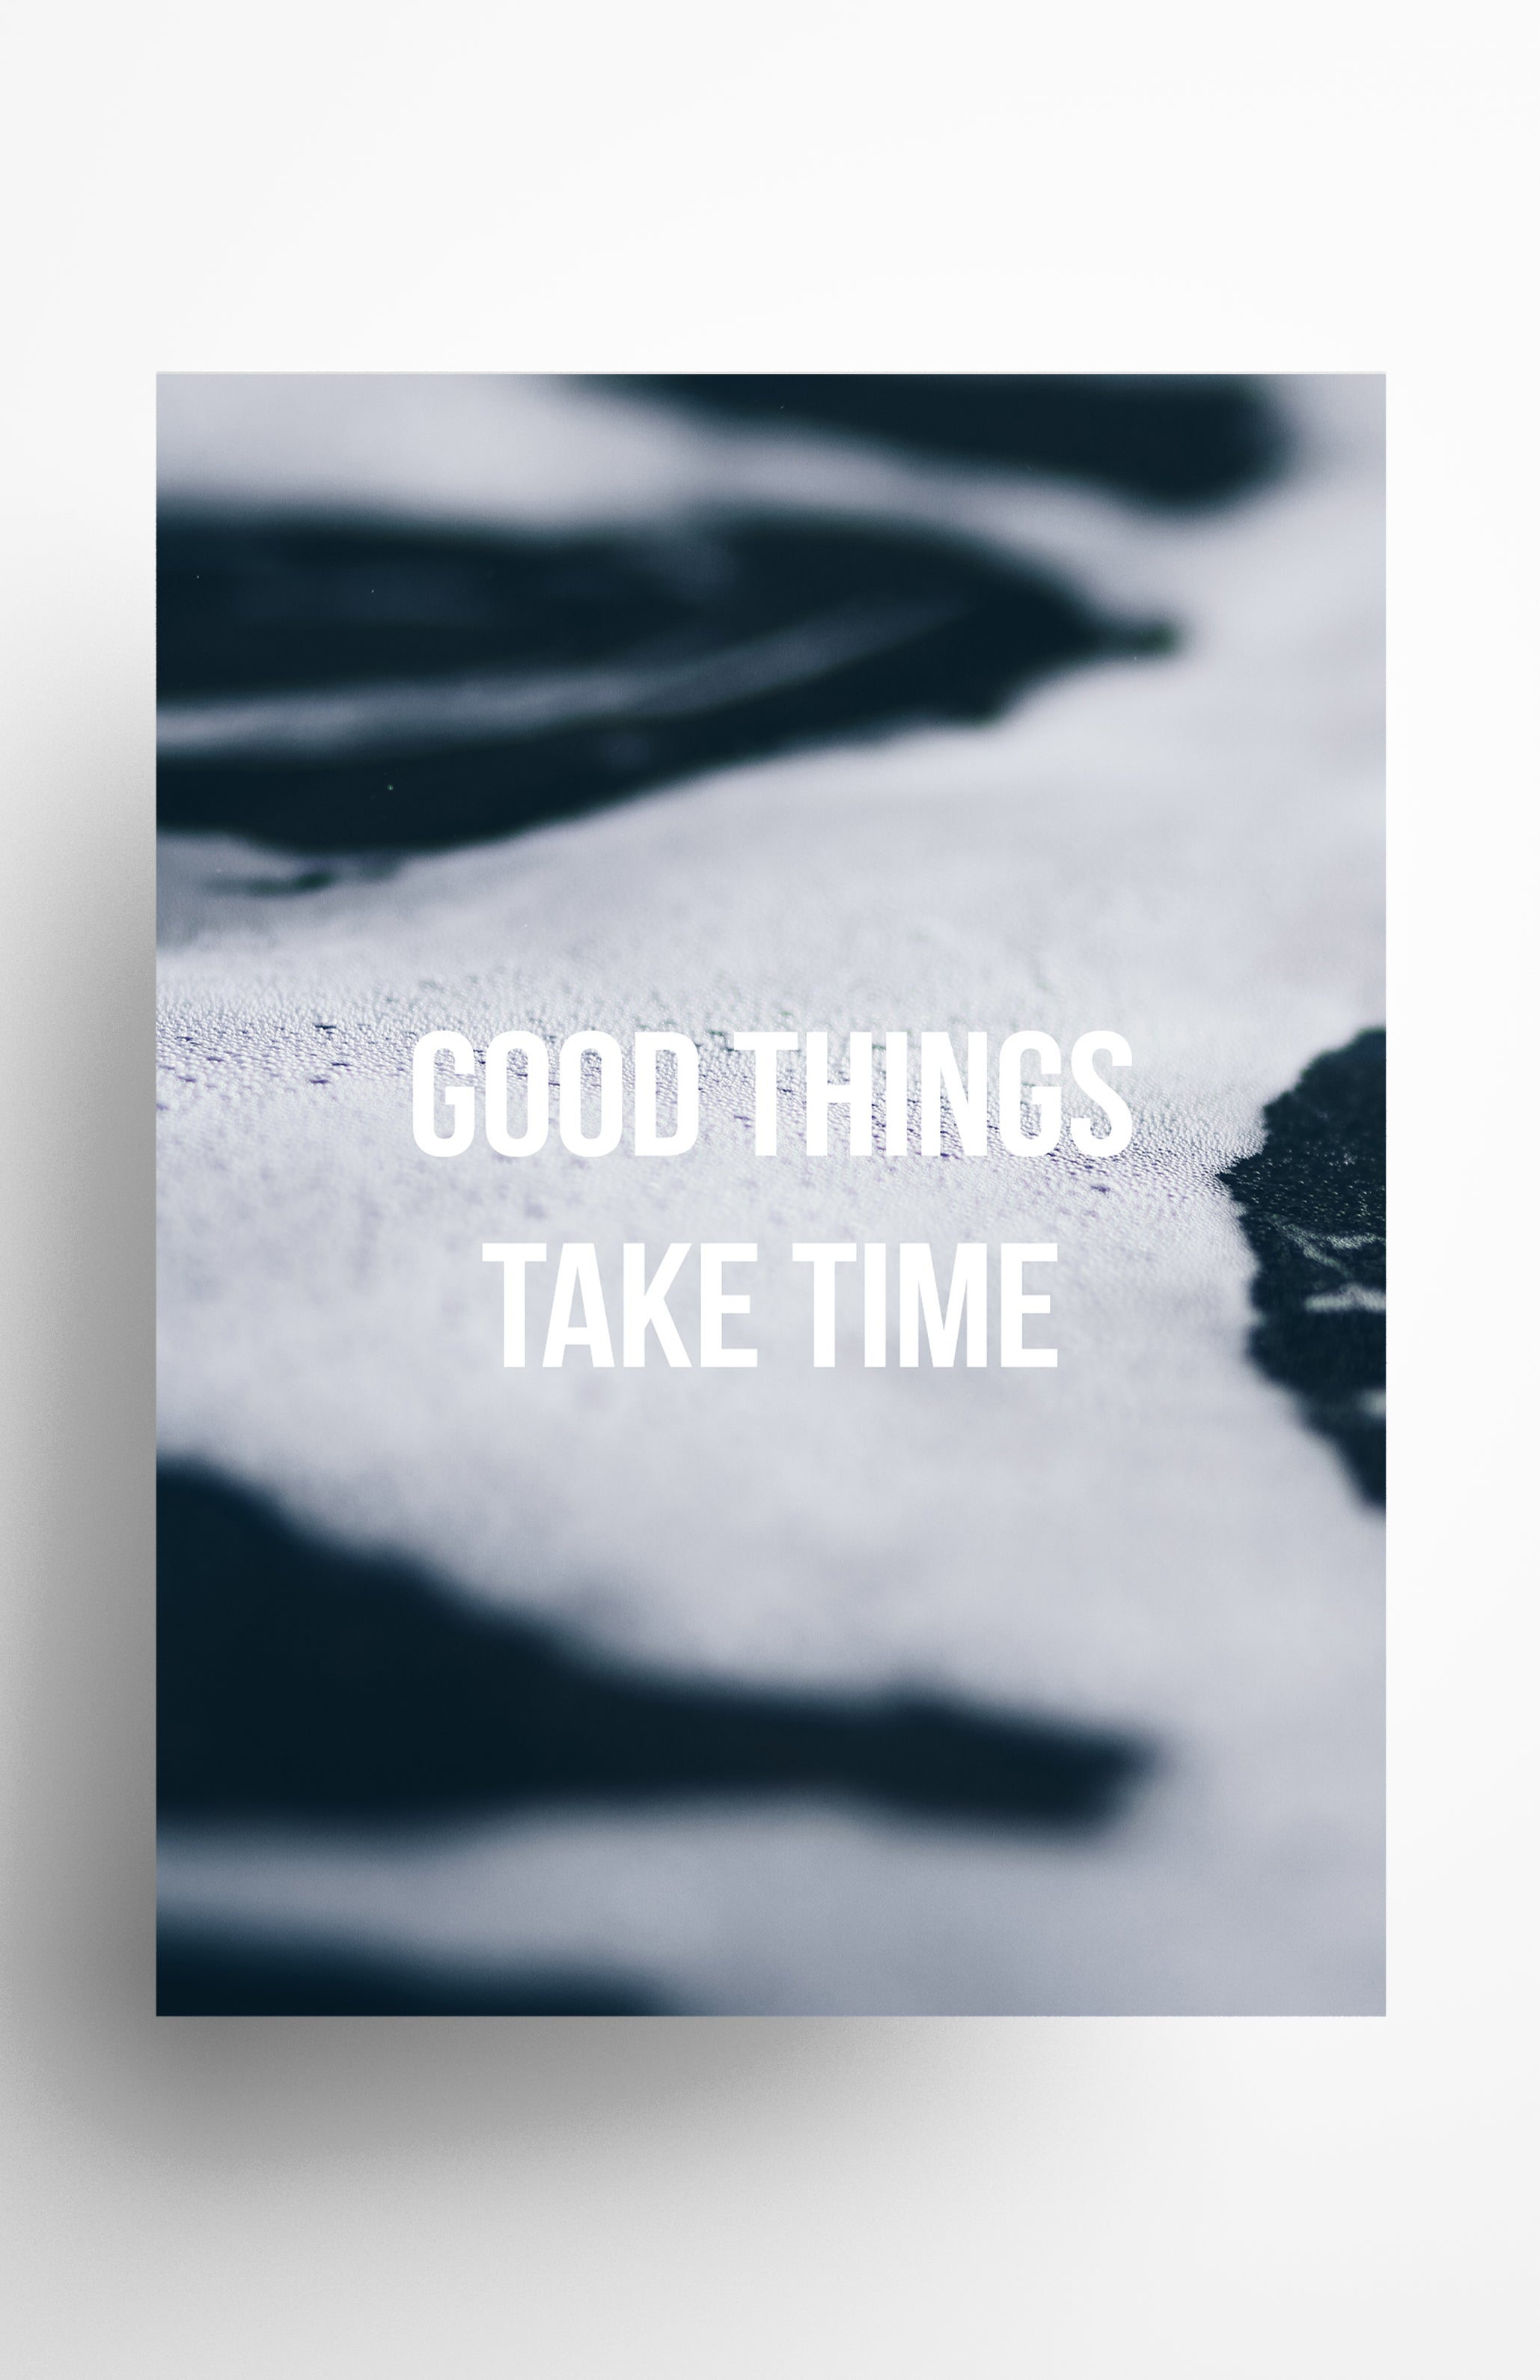 V3 Apparel womens Good Things Take Time, Motivational posters, mens inspirational wall artwork and empowering poster quote designs for office, home gym, school, kitchen and living room.